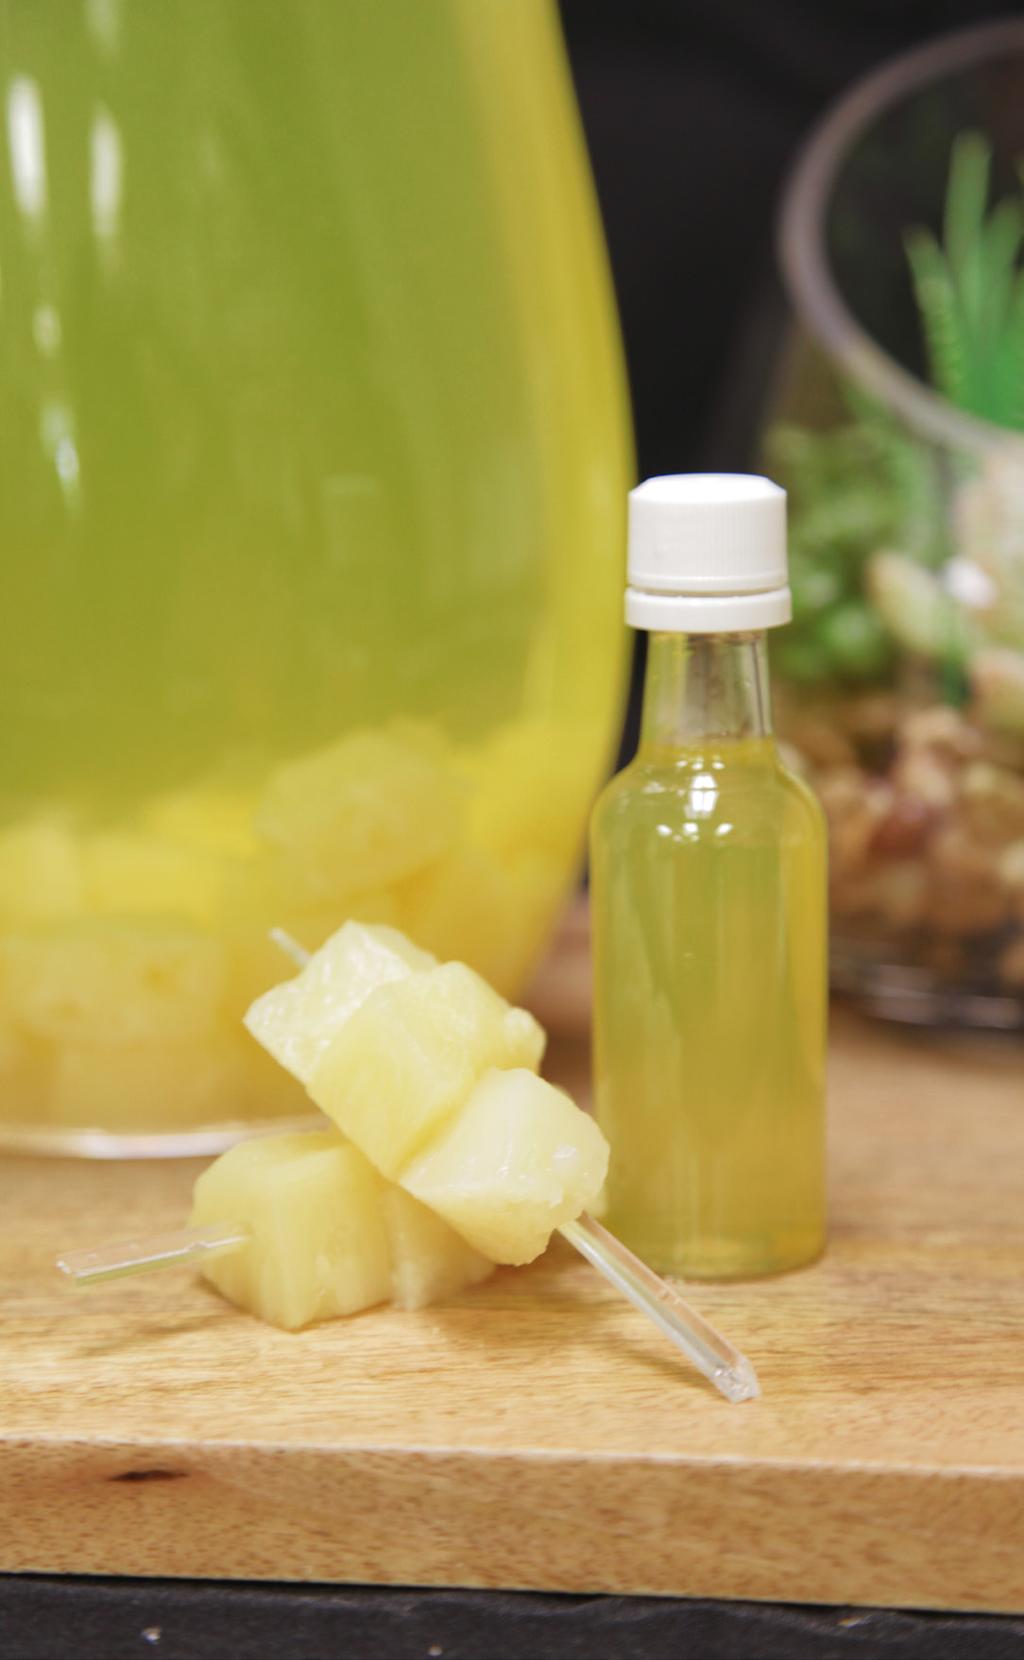 Pineapple Flavored Collagen Peptide Shot Collagen peptides are stable over a wide ph range, making them well-suited for high acid applications such as shelf-stable shotstyle beverages.